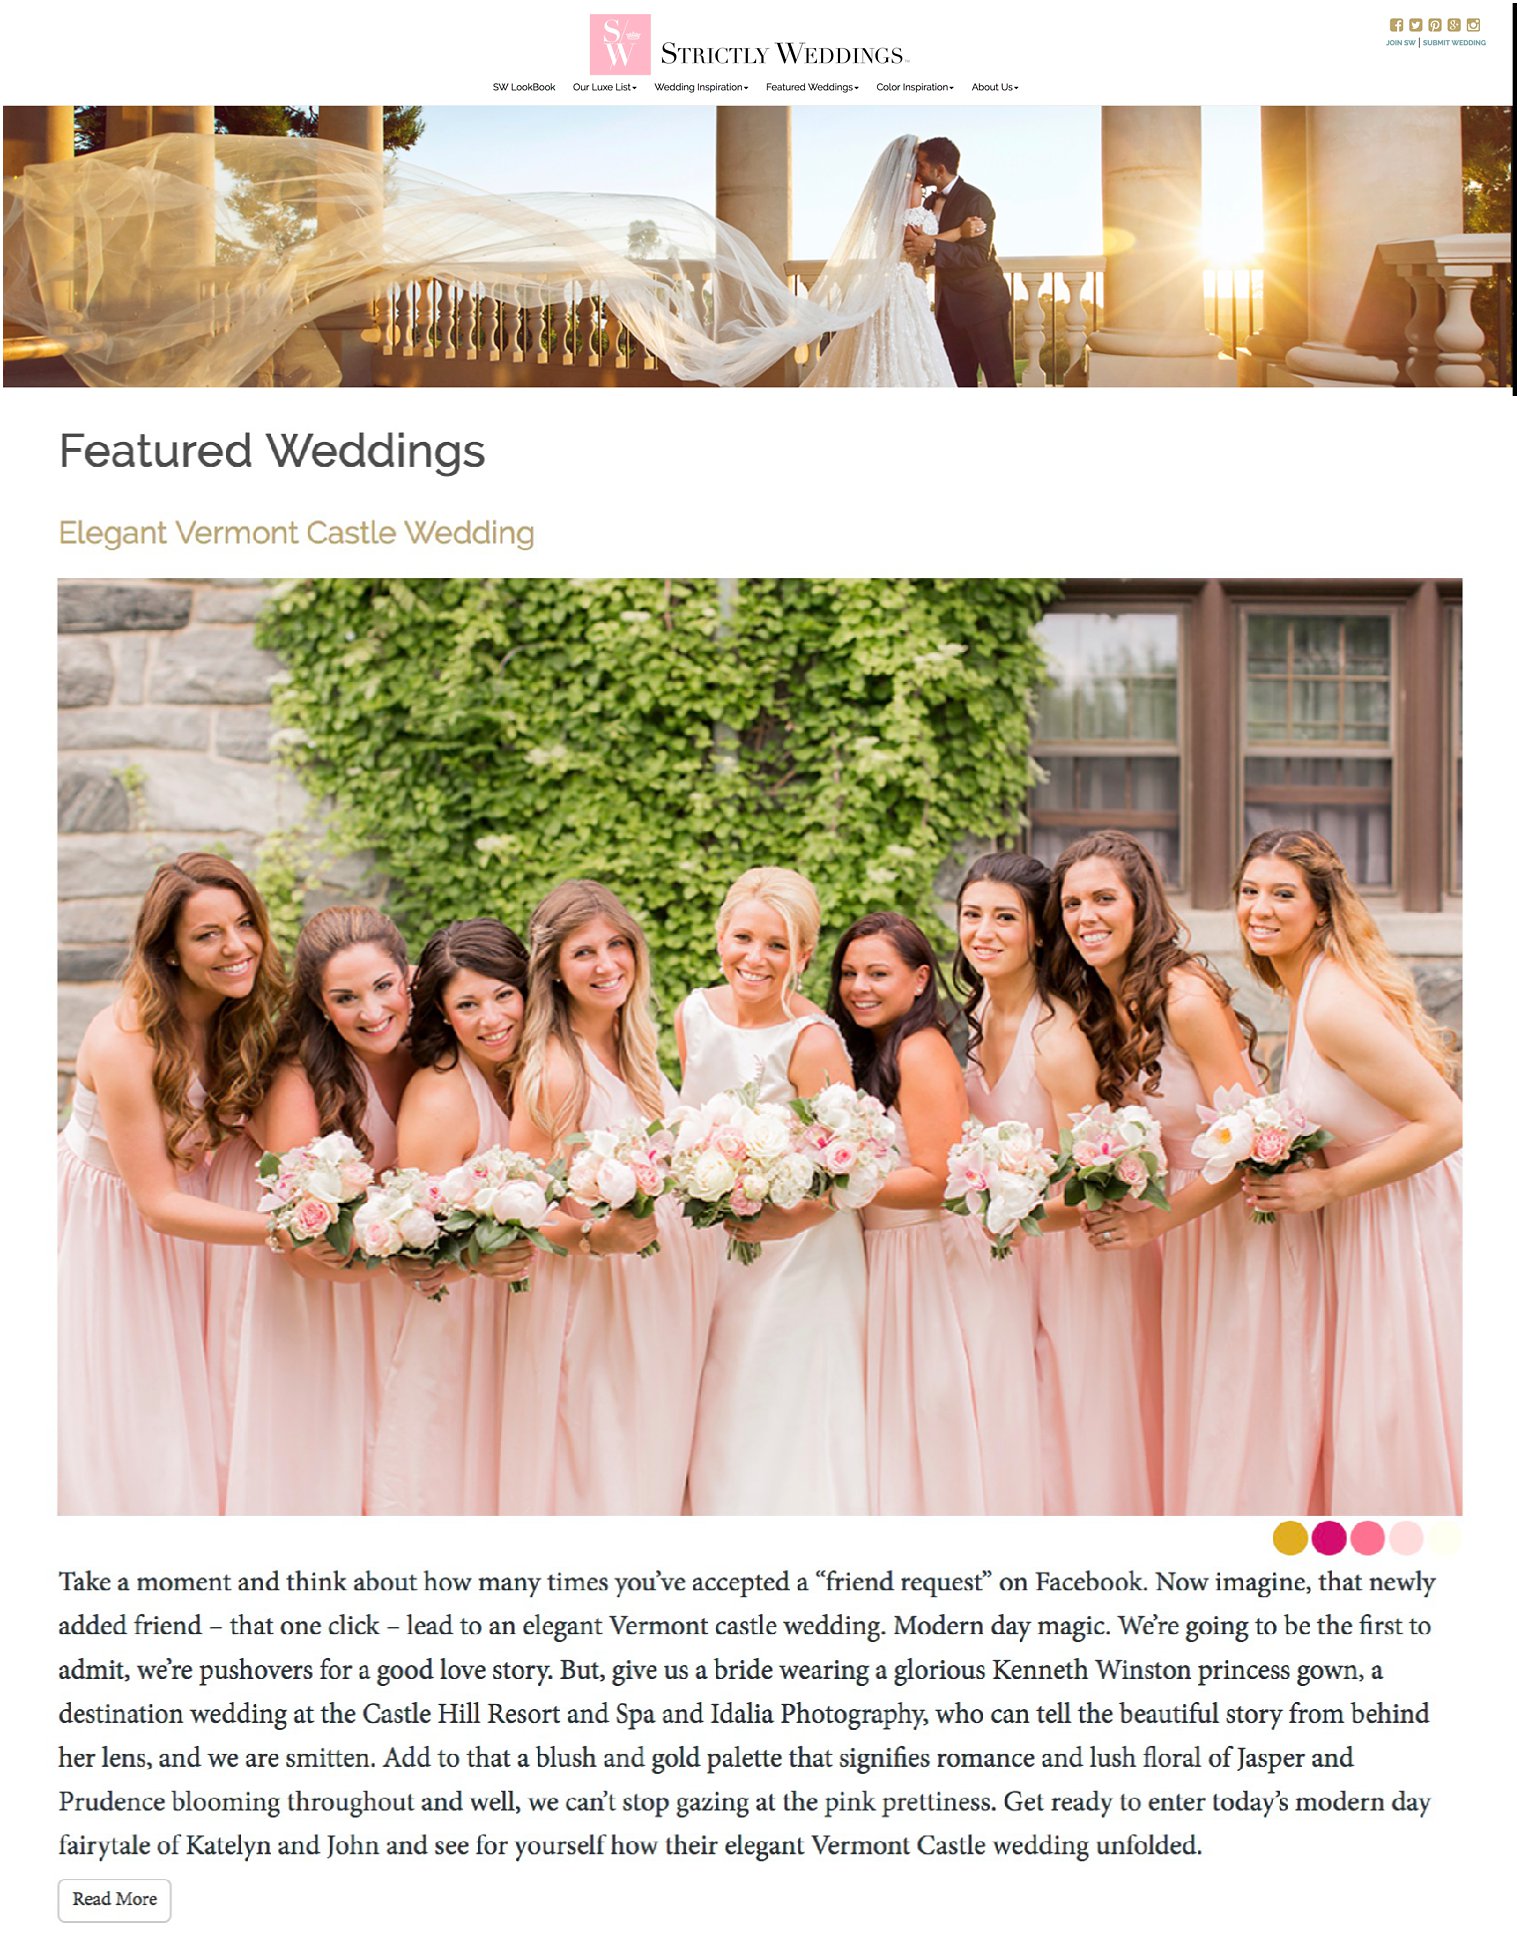 Elegant Vermont Castle Wedding Featured on Strictly Weddings